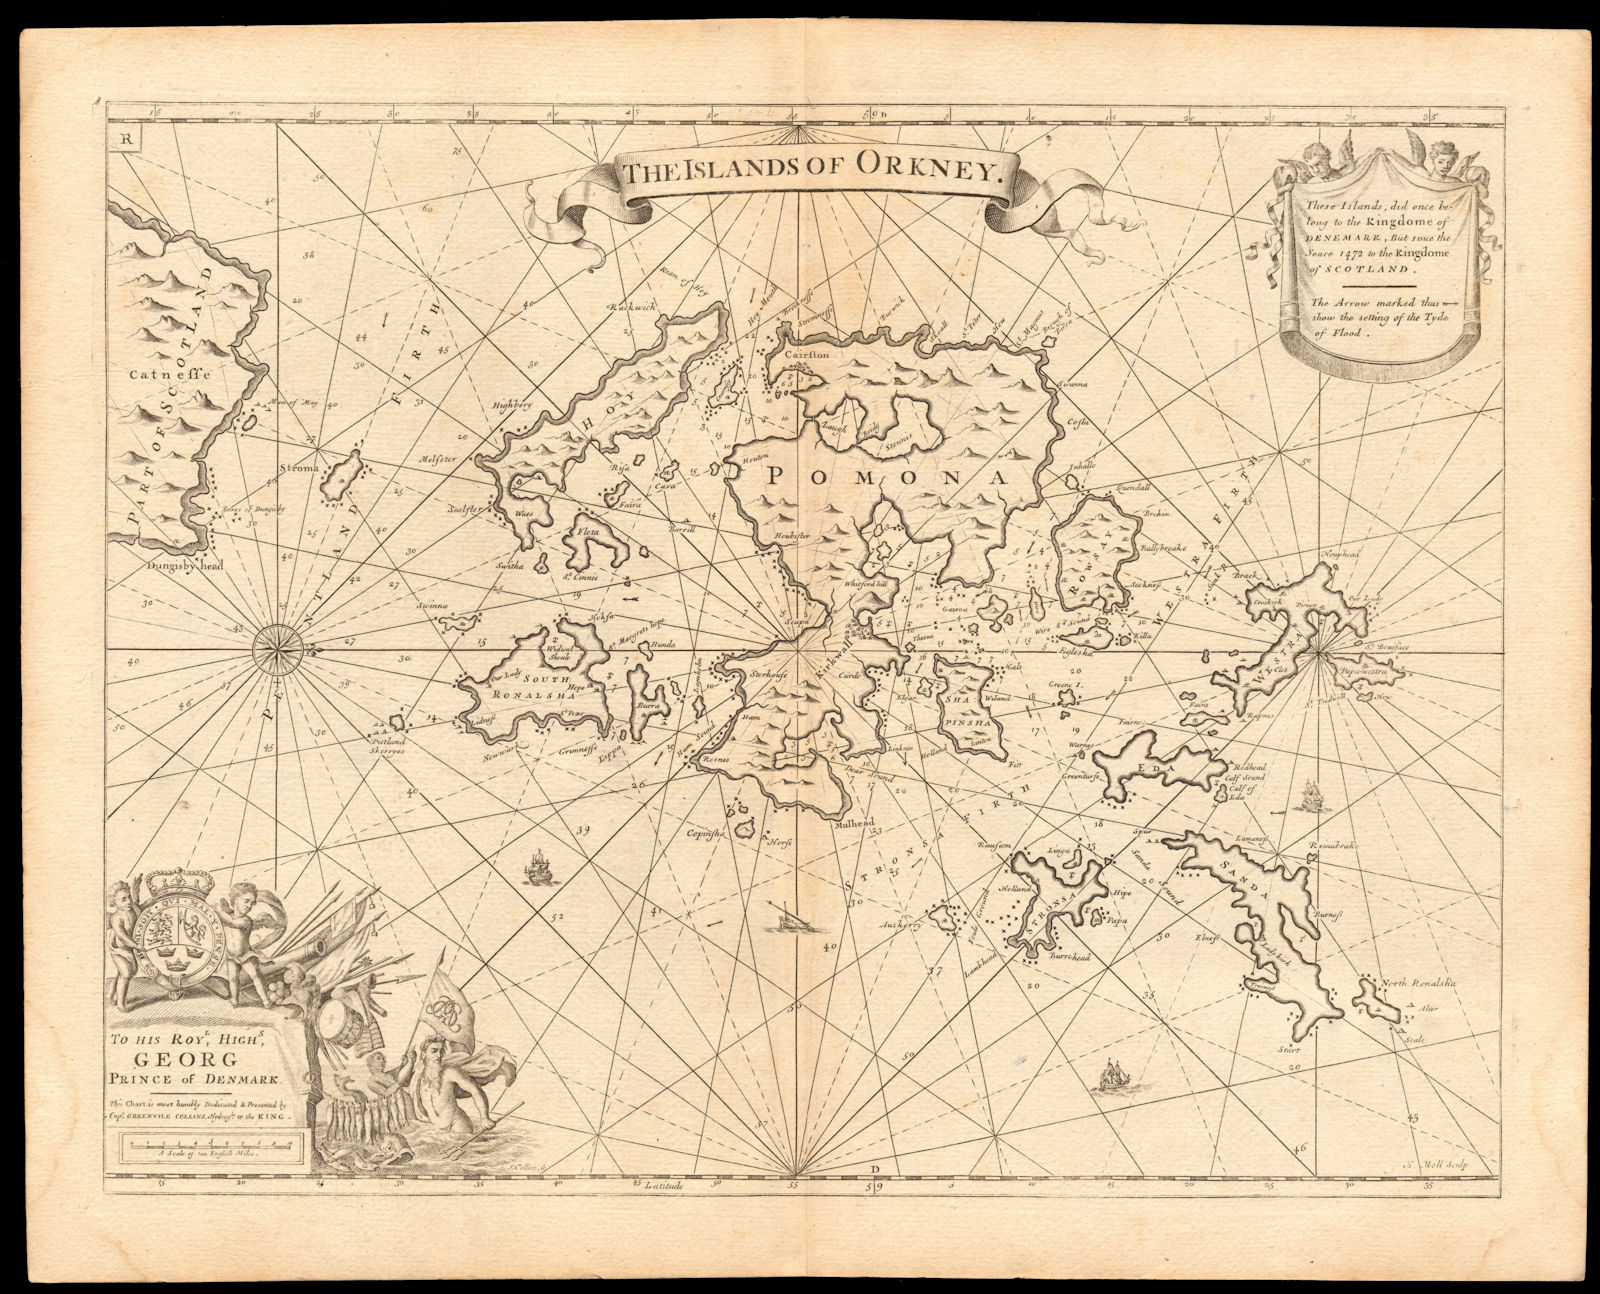 'The Islands of Orkney' sea chart by Capt G. COLLINS. Pomona Hoy &c c1774 map